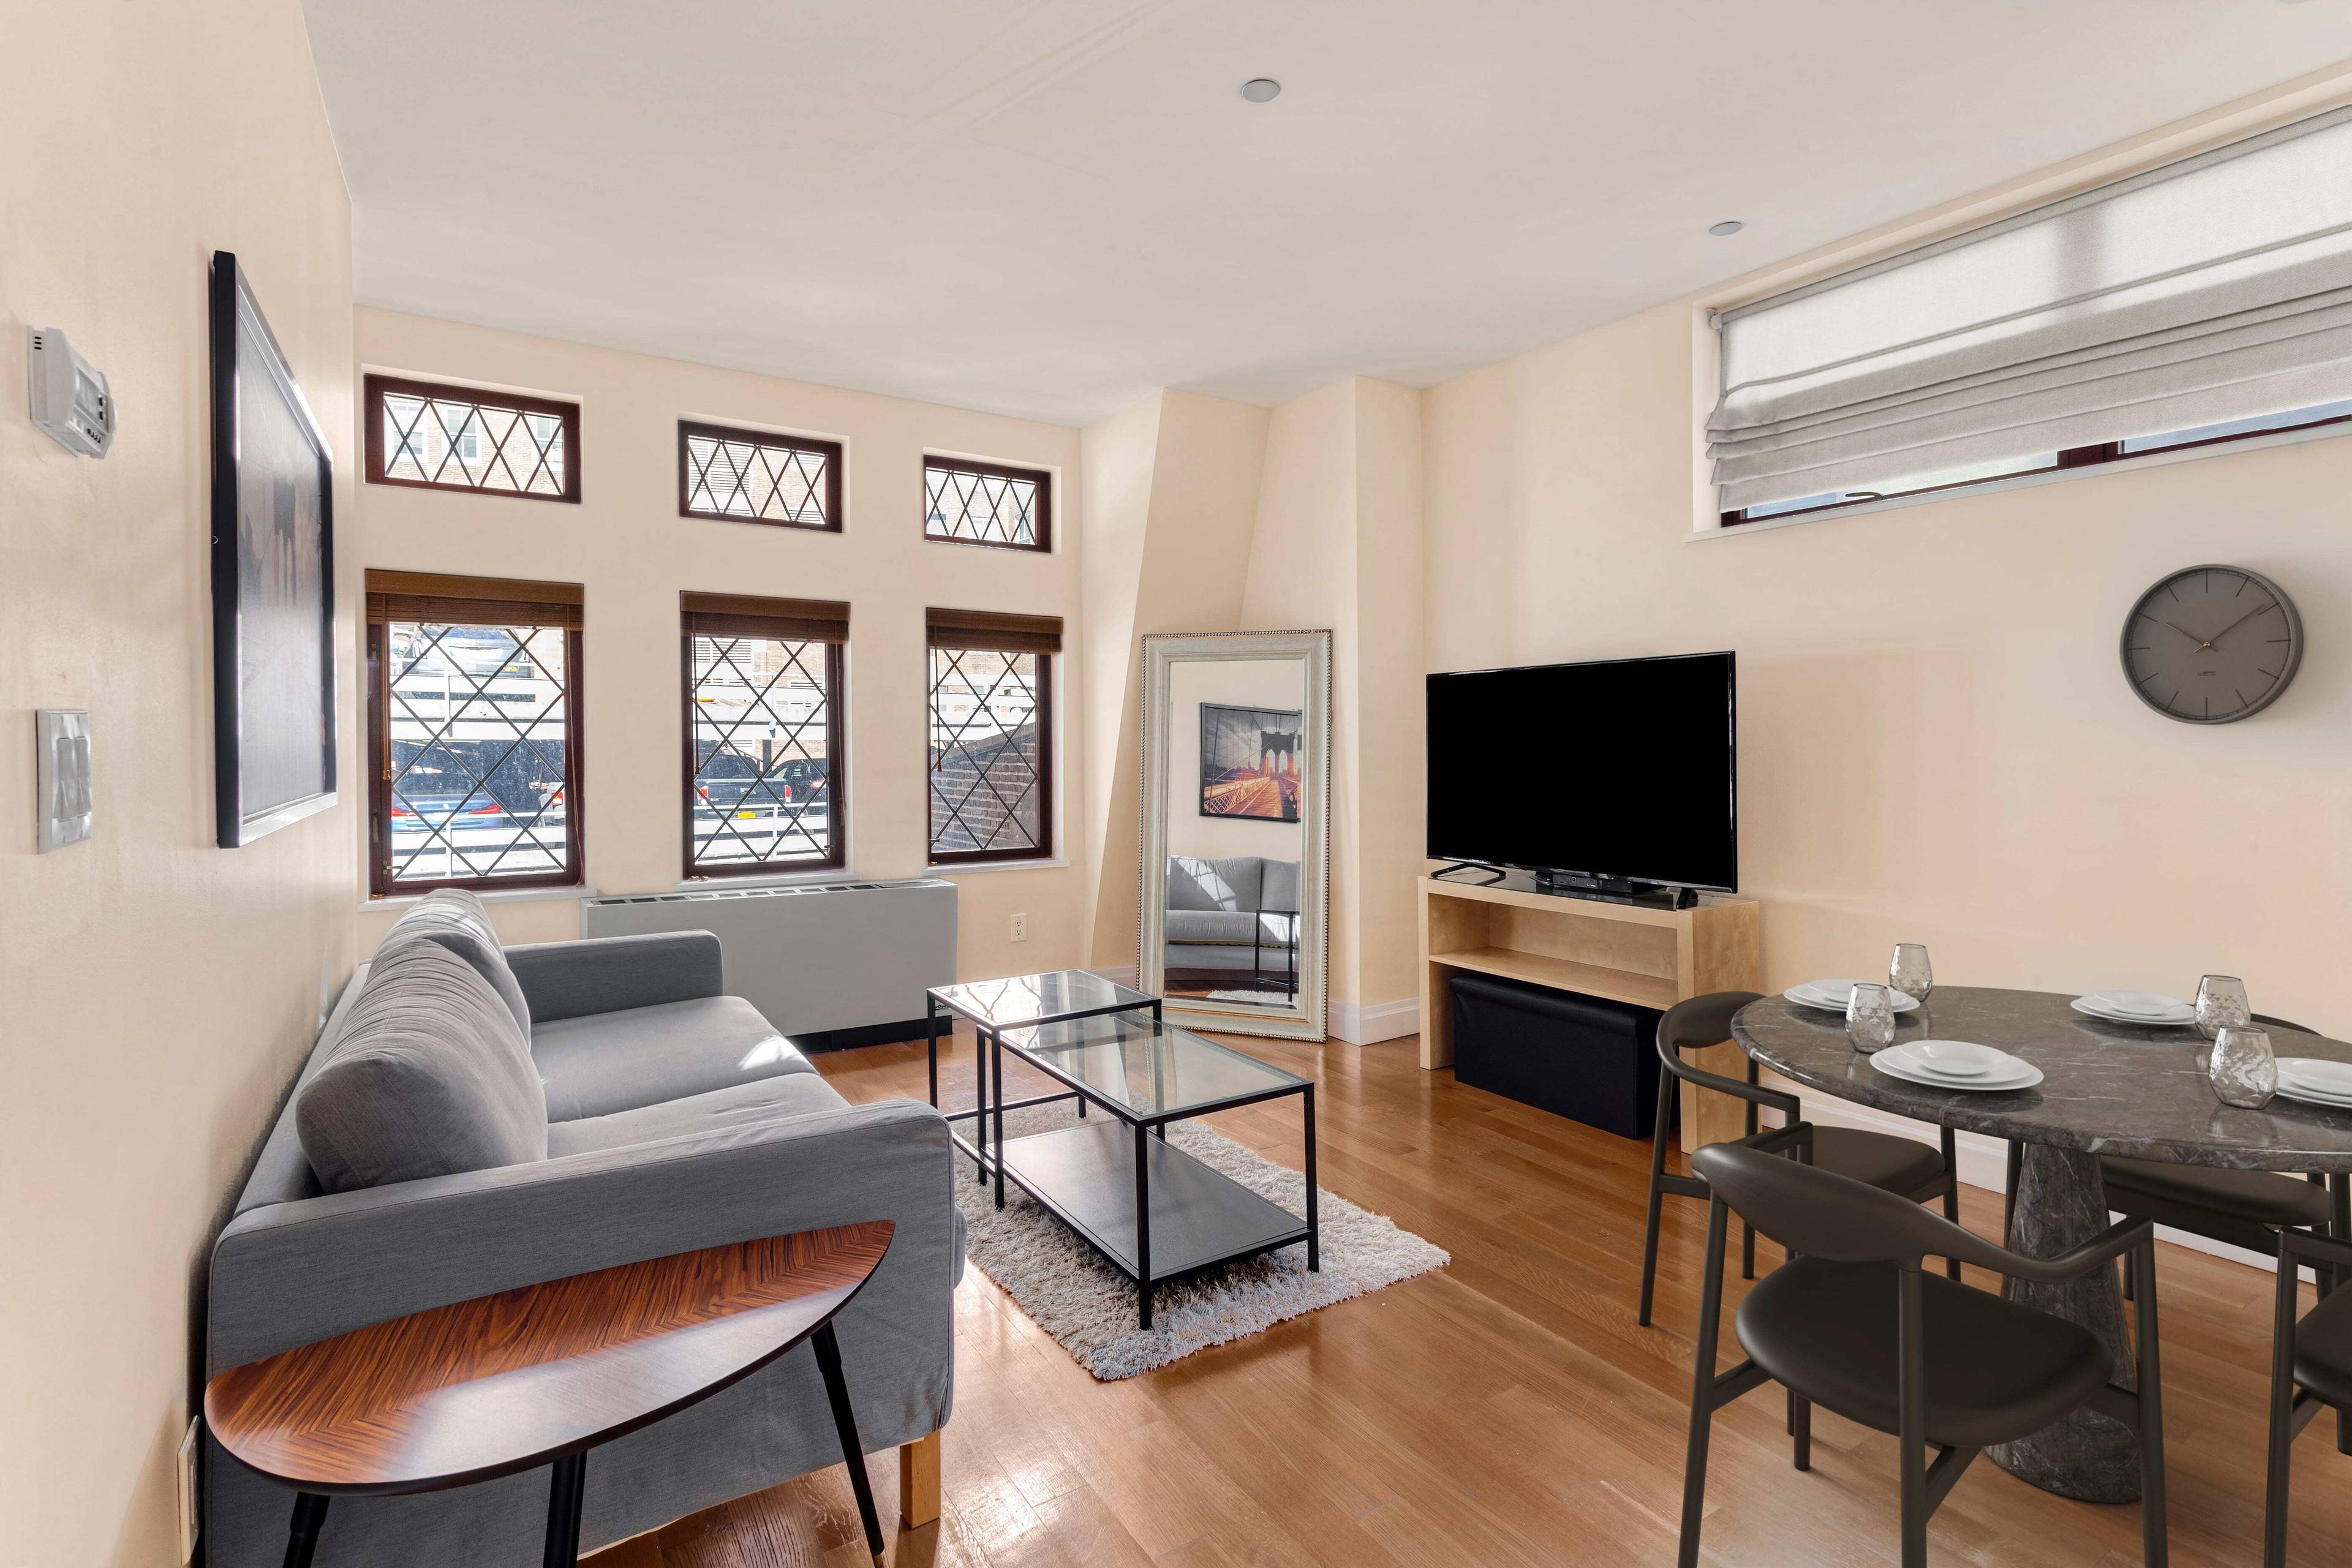 For the true New Yorker, 5A offers the charm and allure of being a part of history while enjoying the spectacular finishes of a recently renovated apartment.